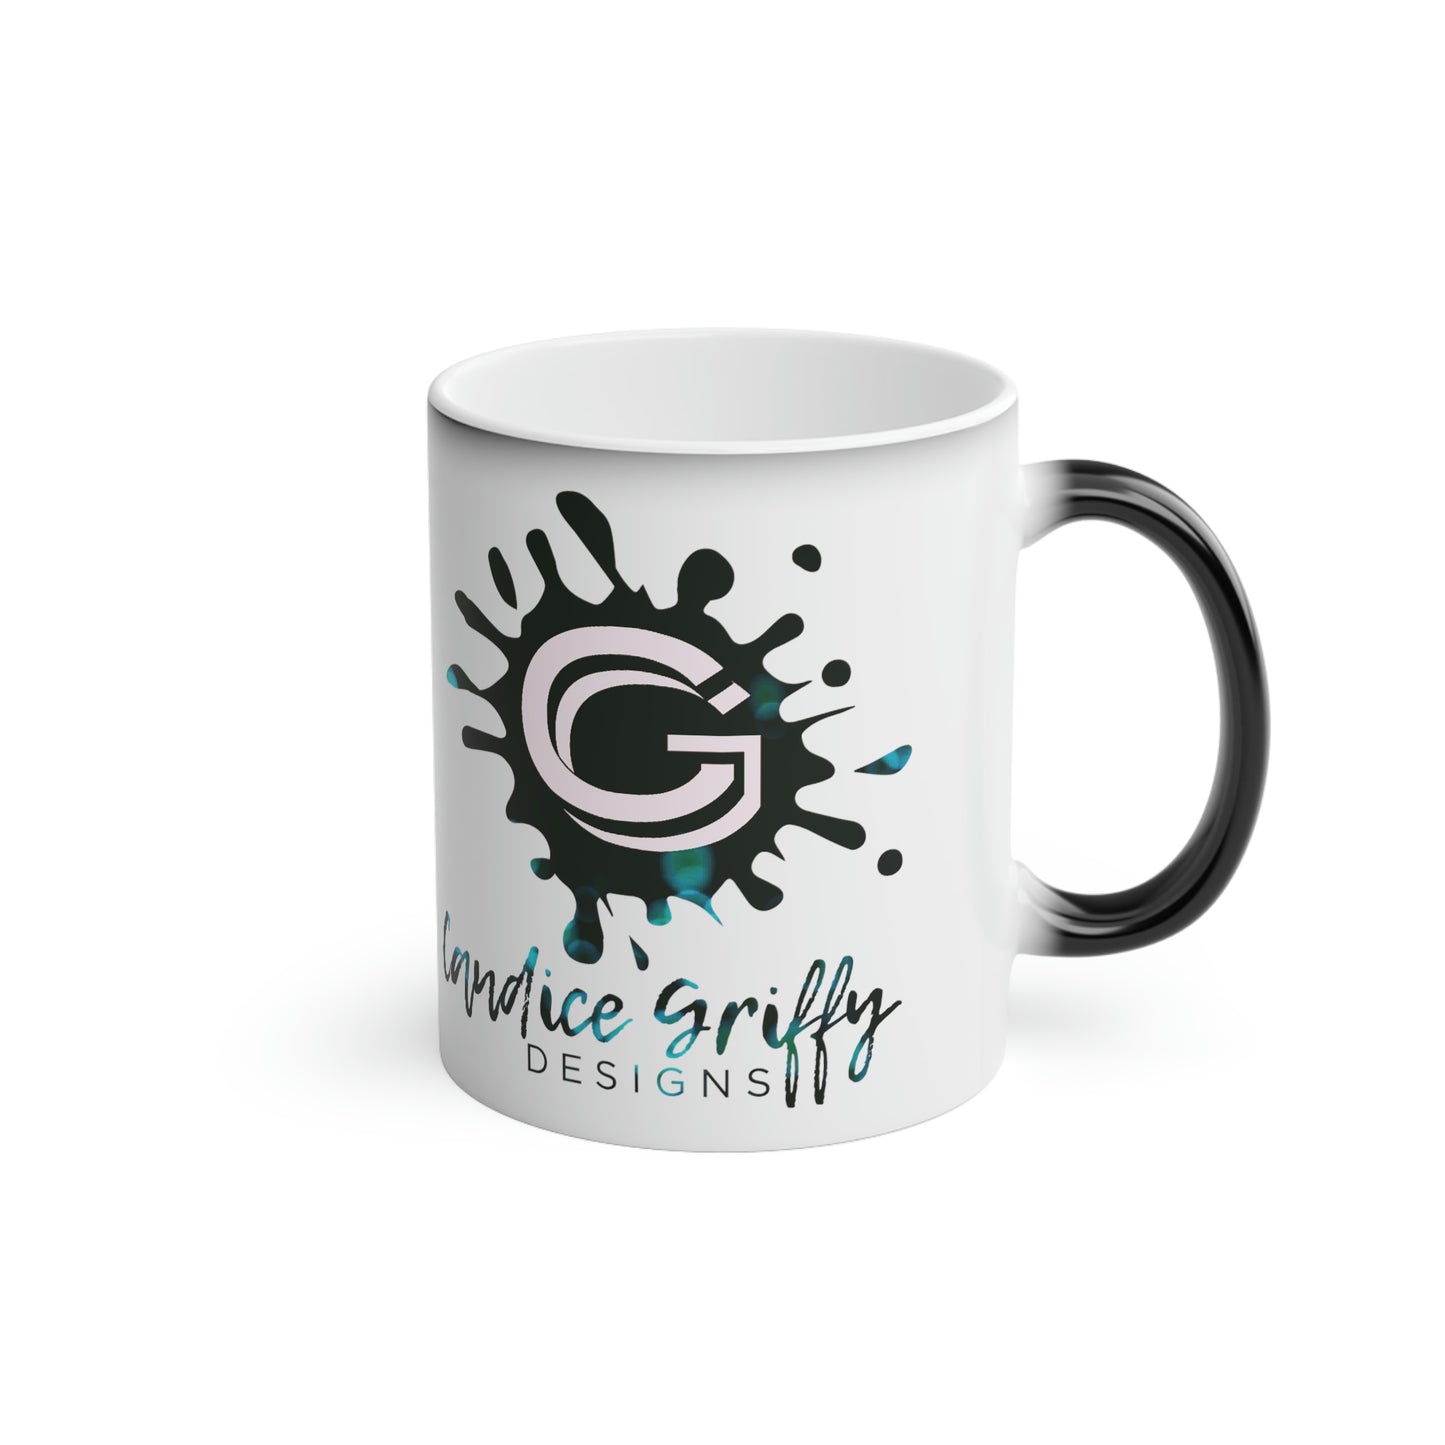 Candice Griffy Designs Magic Color Changing Mug